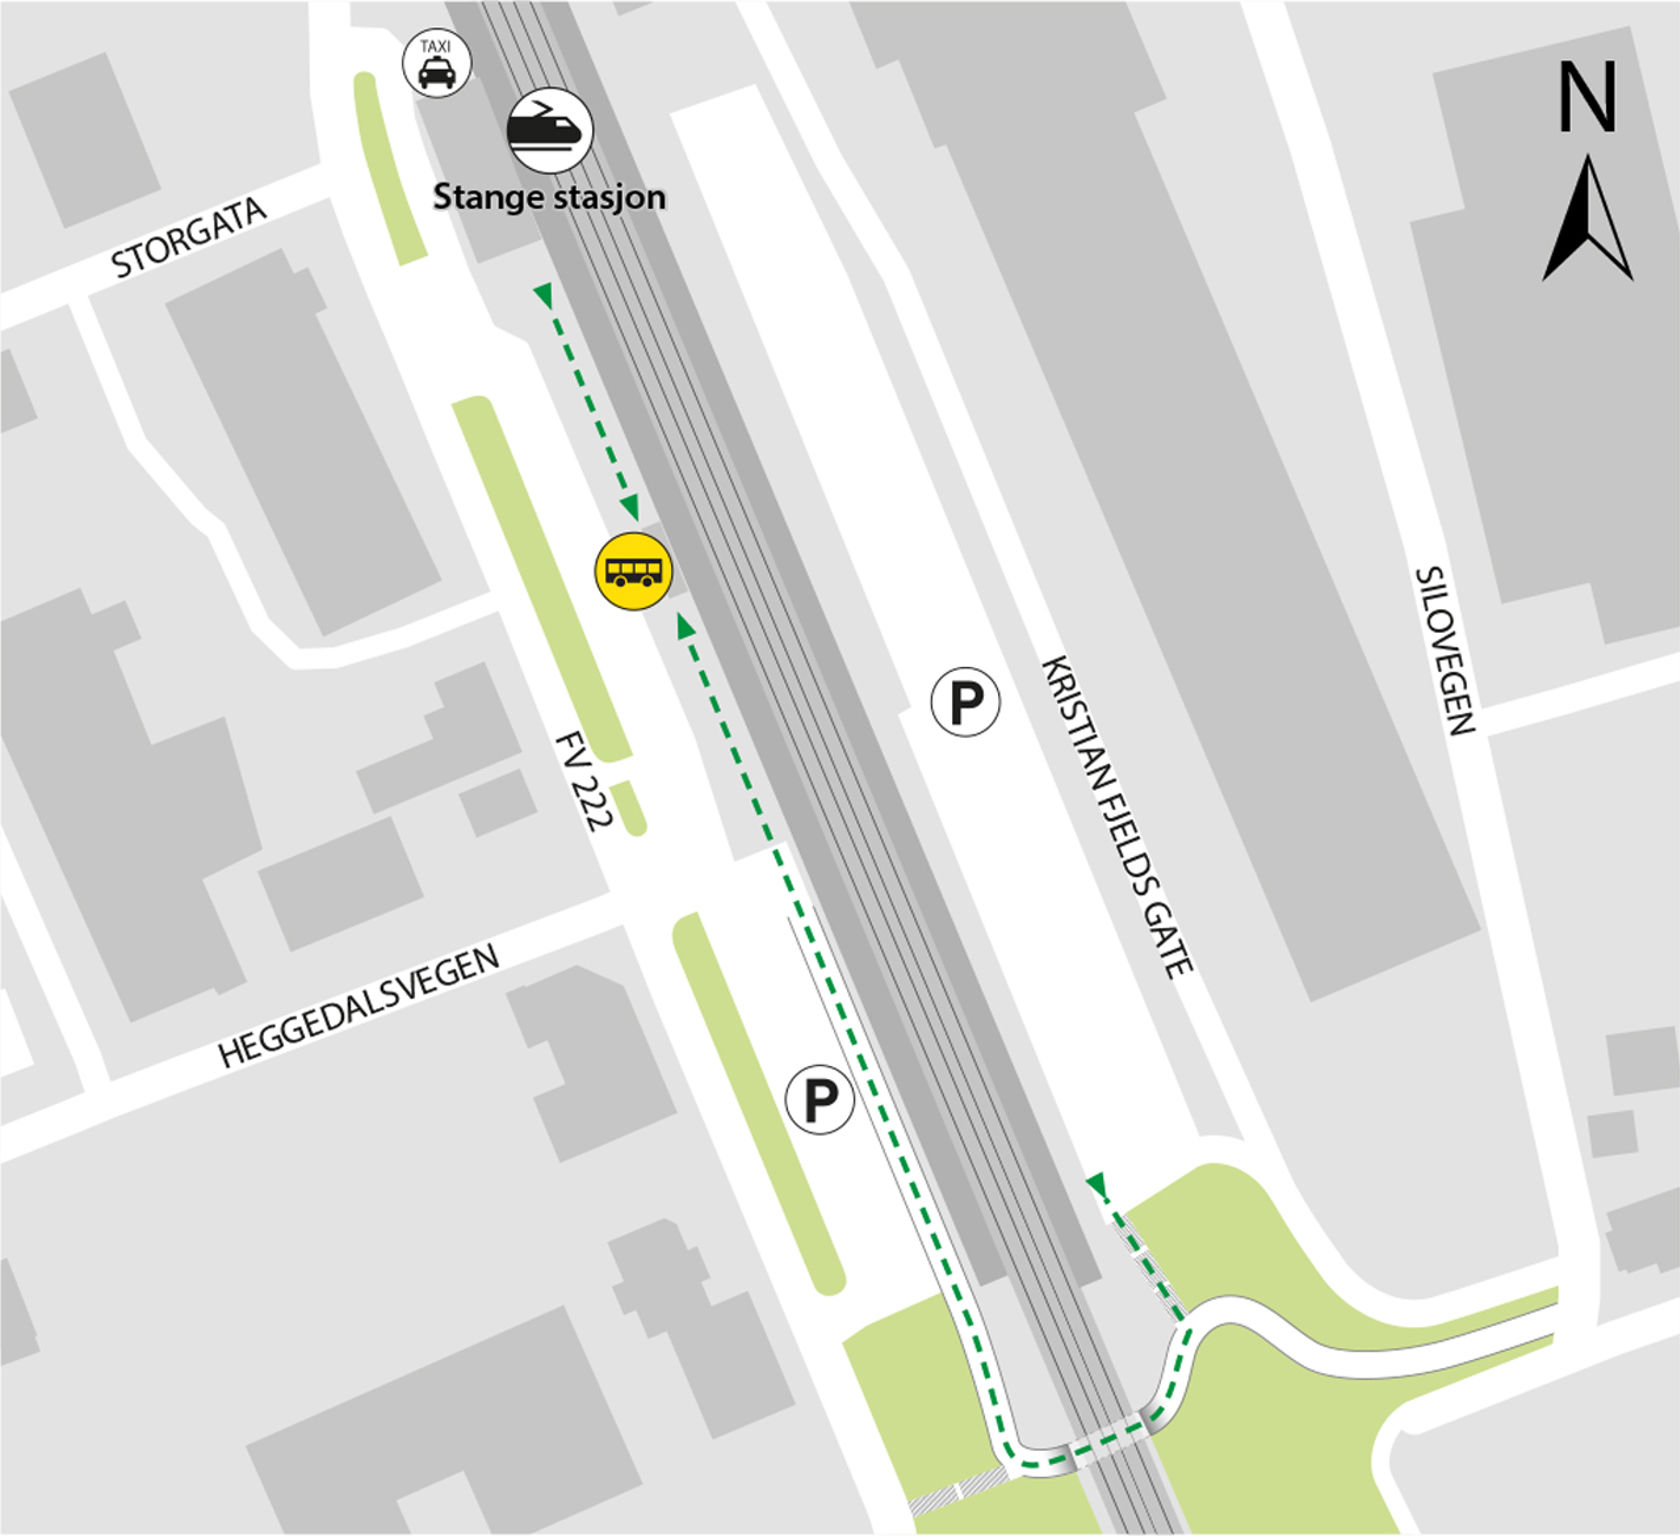 Map shows rail replacement service departs from bus stop at Stange public transport station.